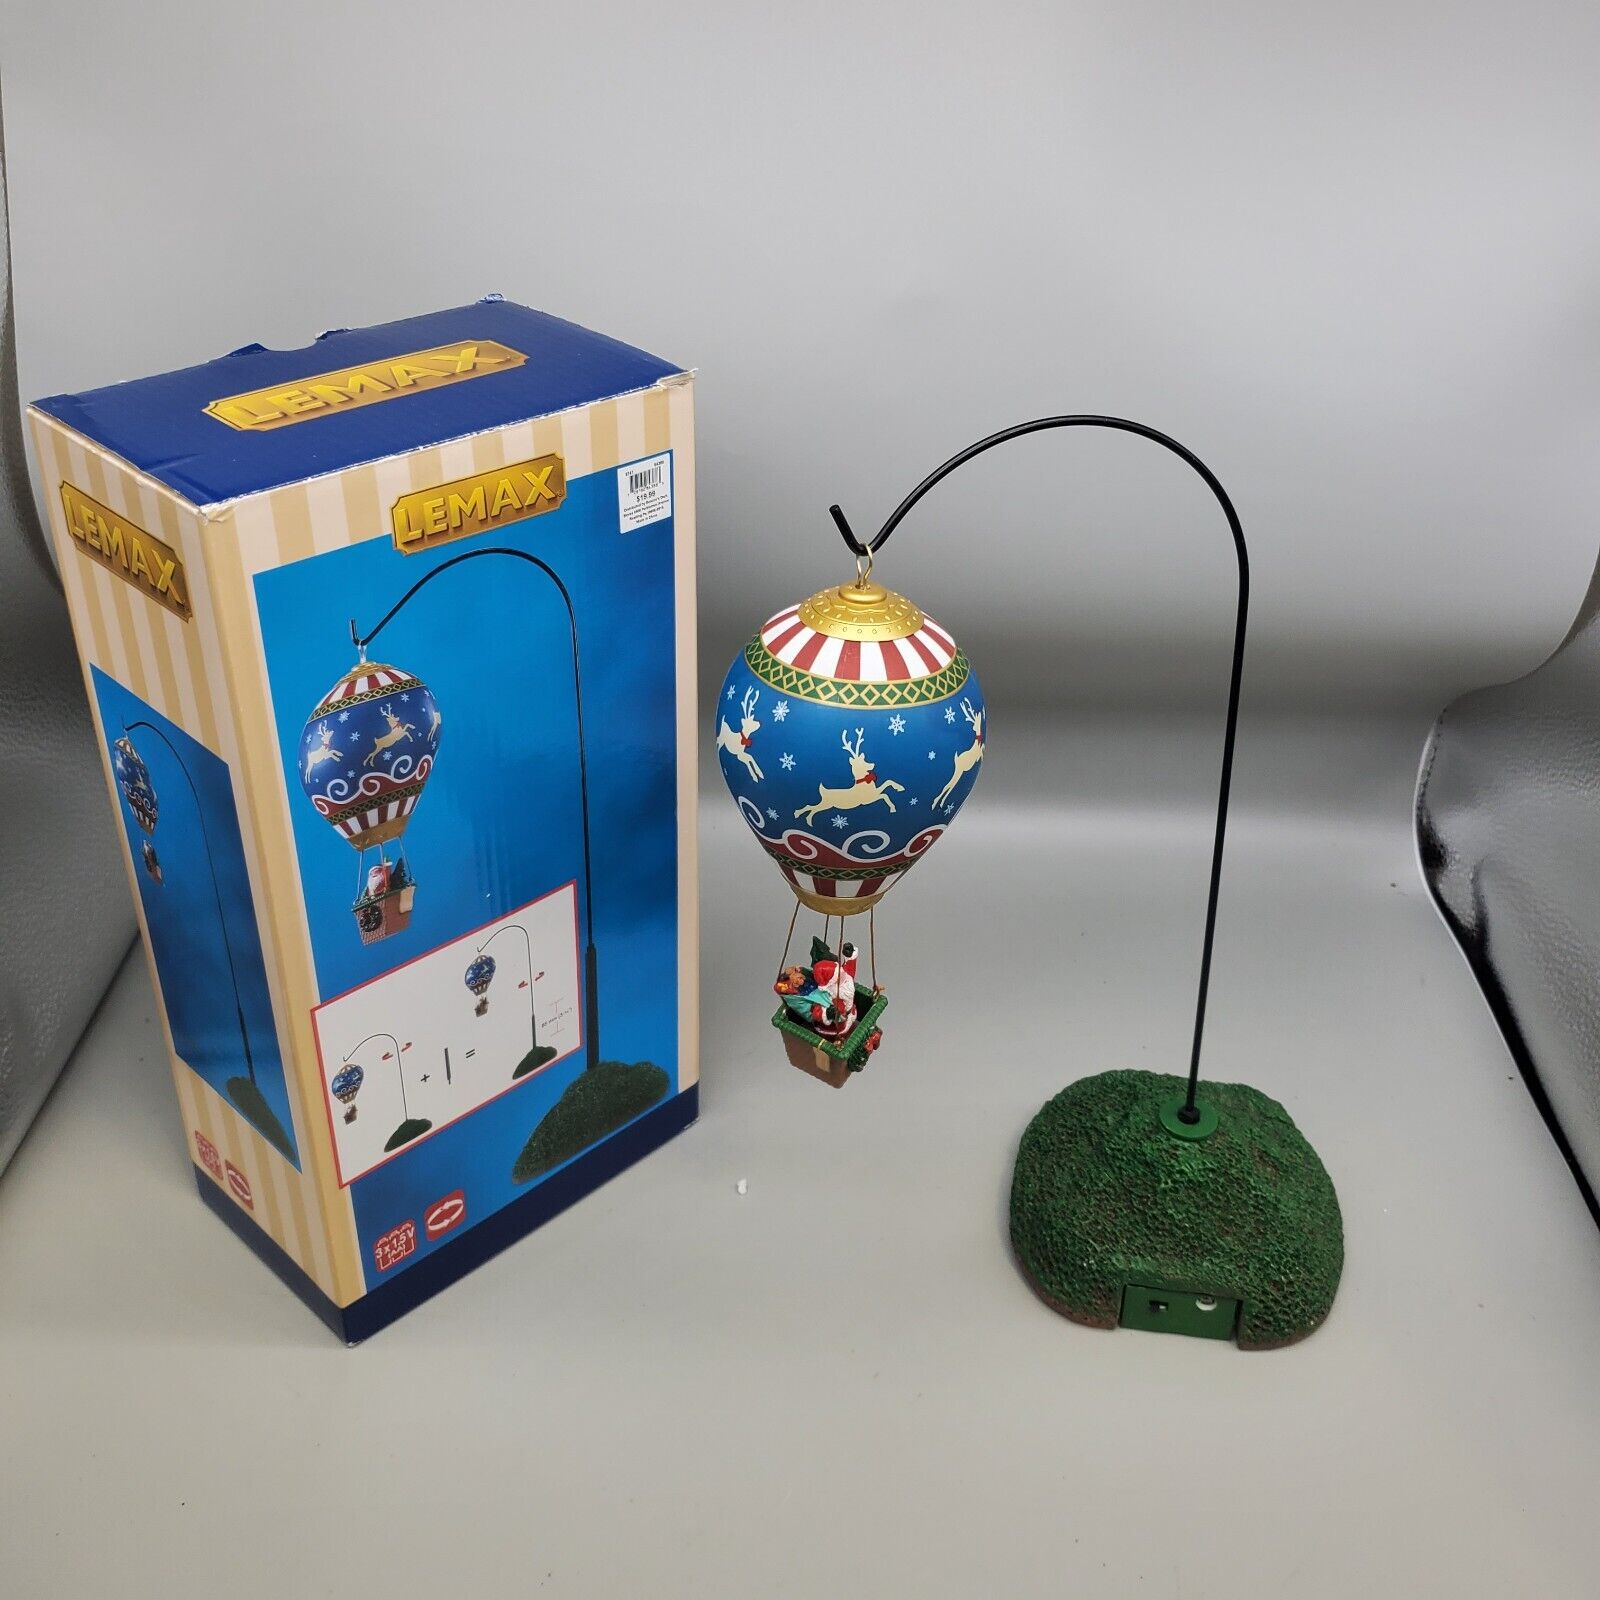 Lemax Holiday Christmas Village Reindeer Hot Air Balloon Animated